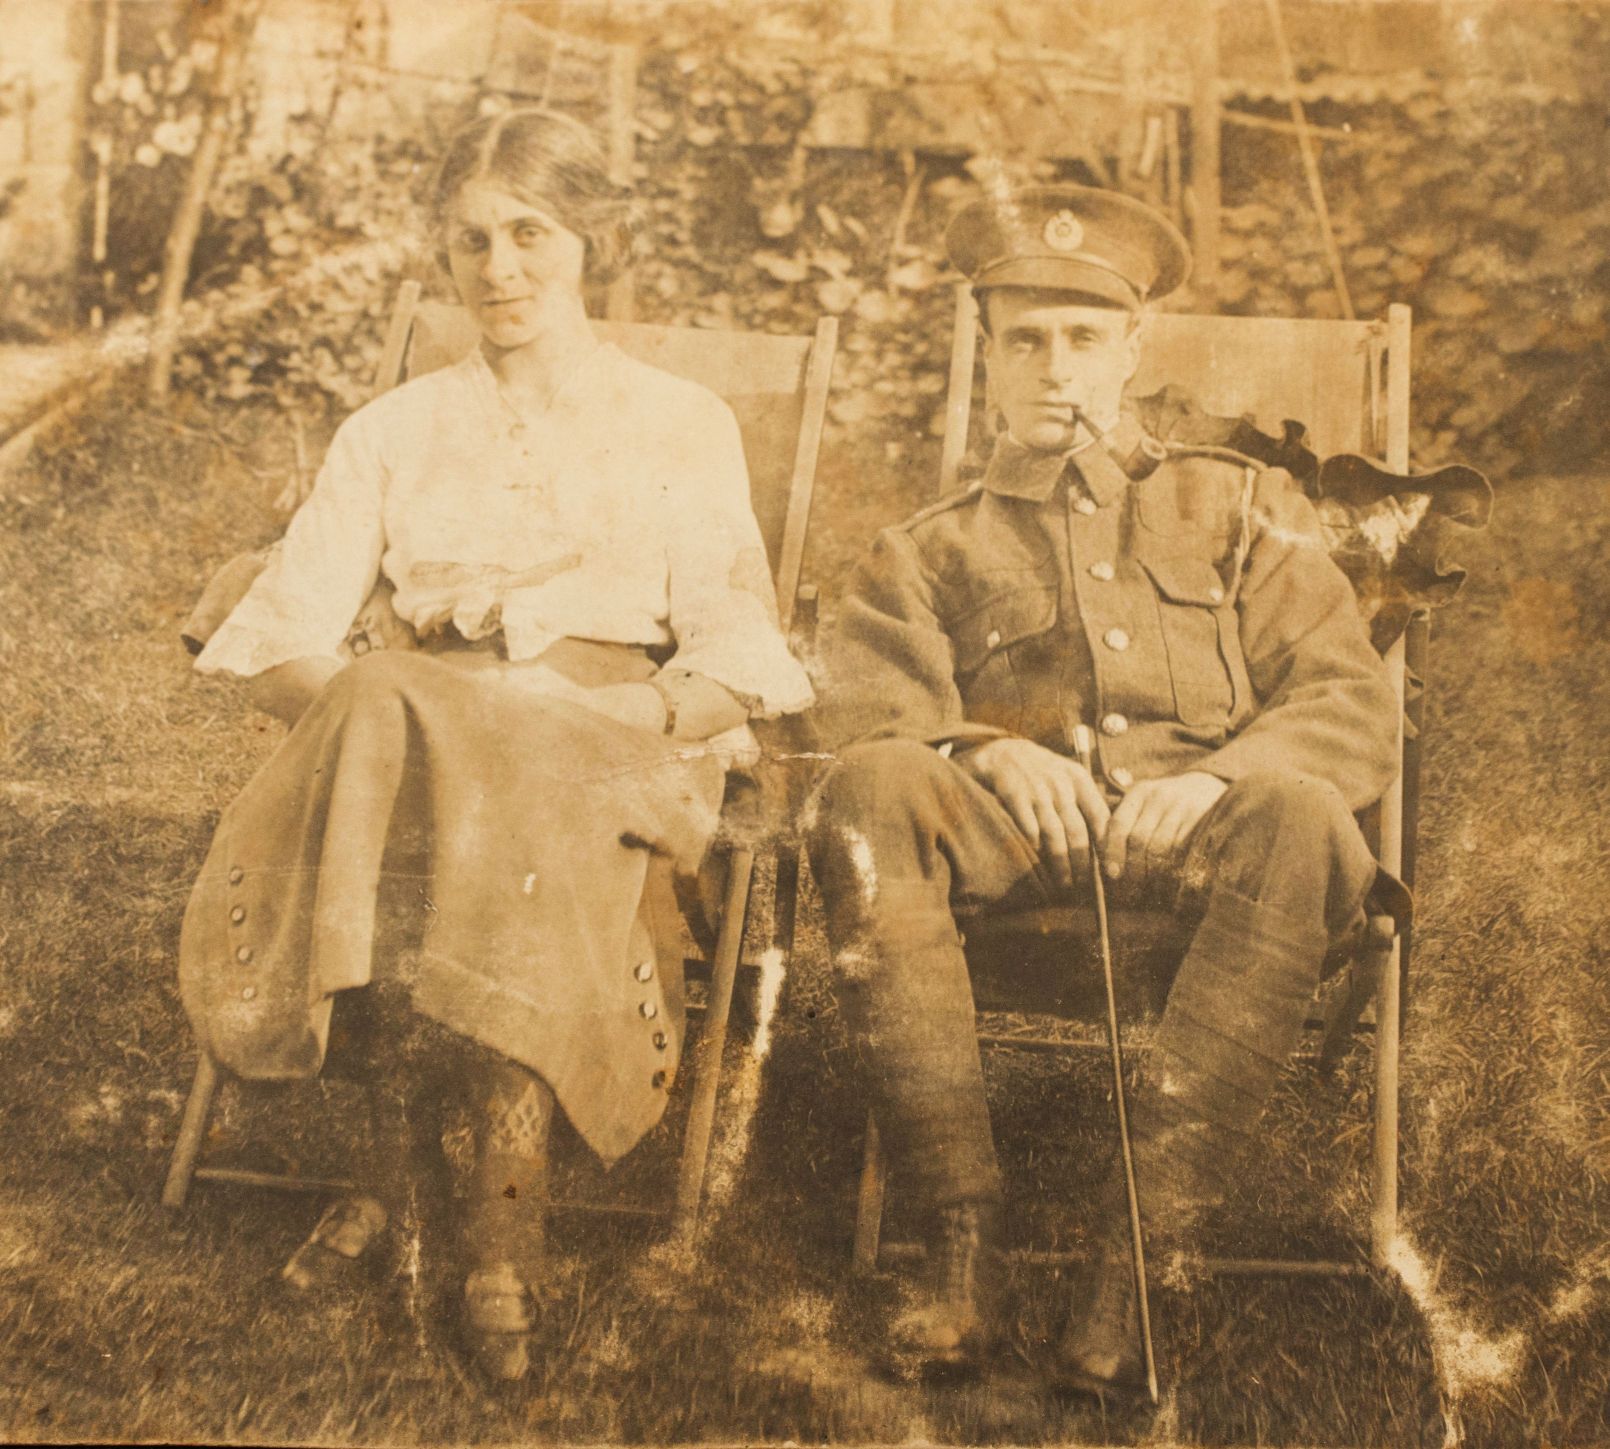 Ernest seated